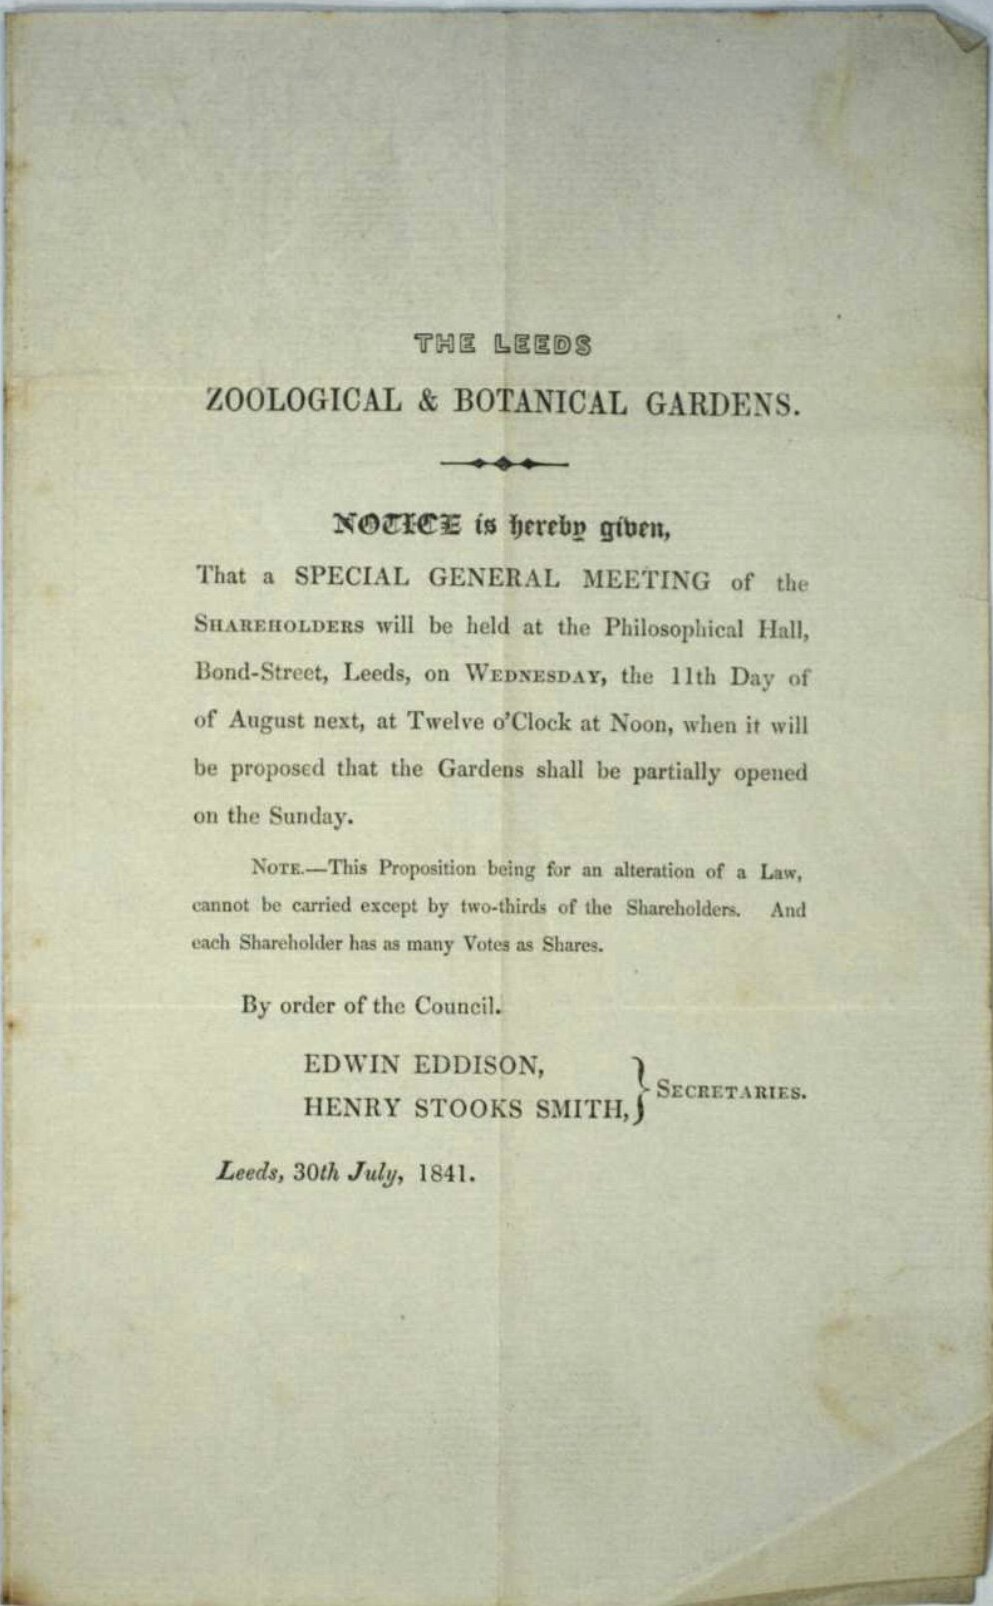 Leeds Zoological and Botanical Gardens, Special General Meeting, 11 August 1841